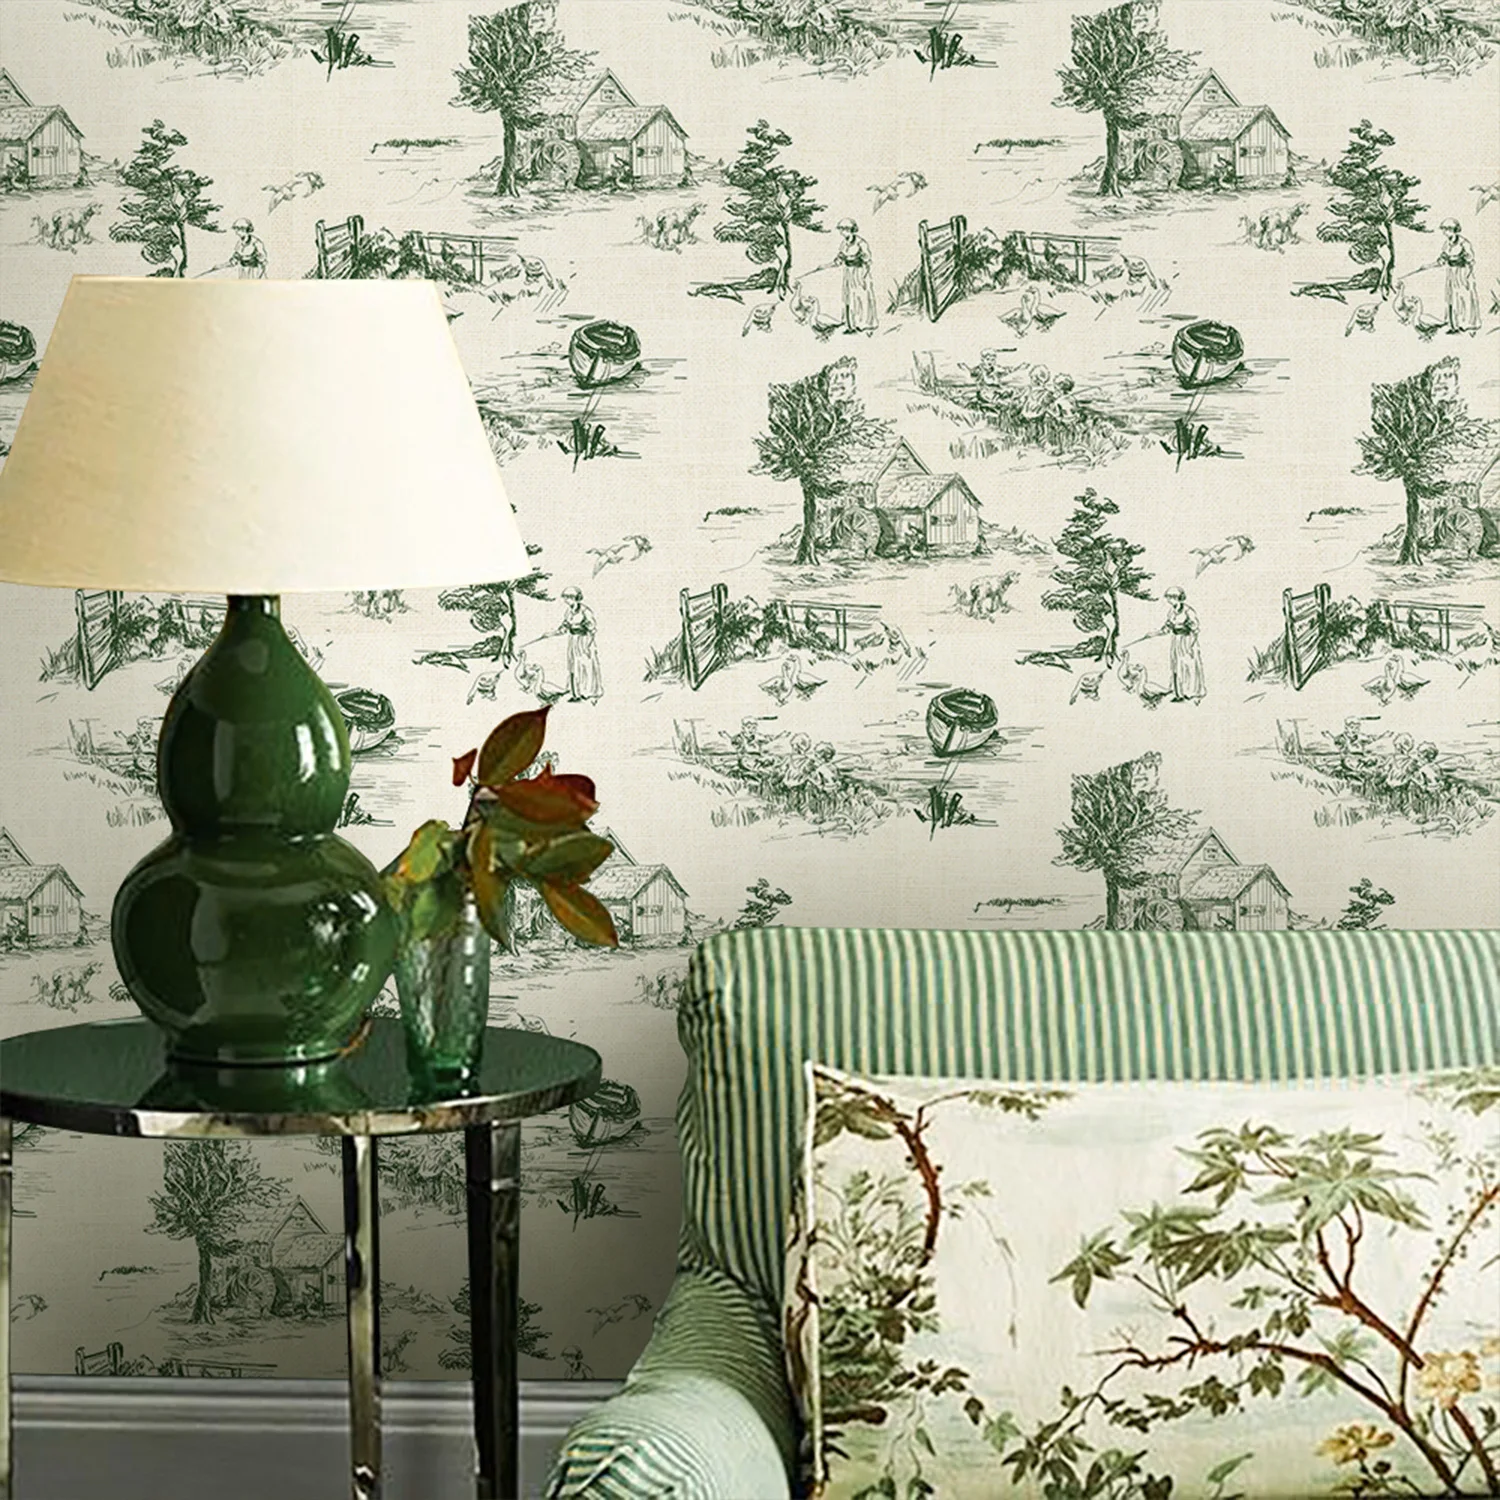 Sepia Toile de Jouy Wallpaper French 20th Century in Misc